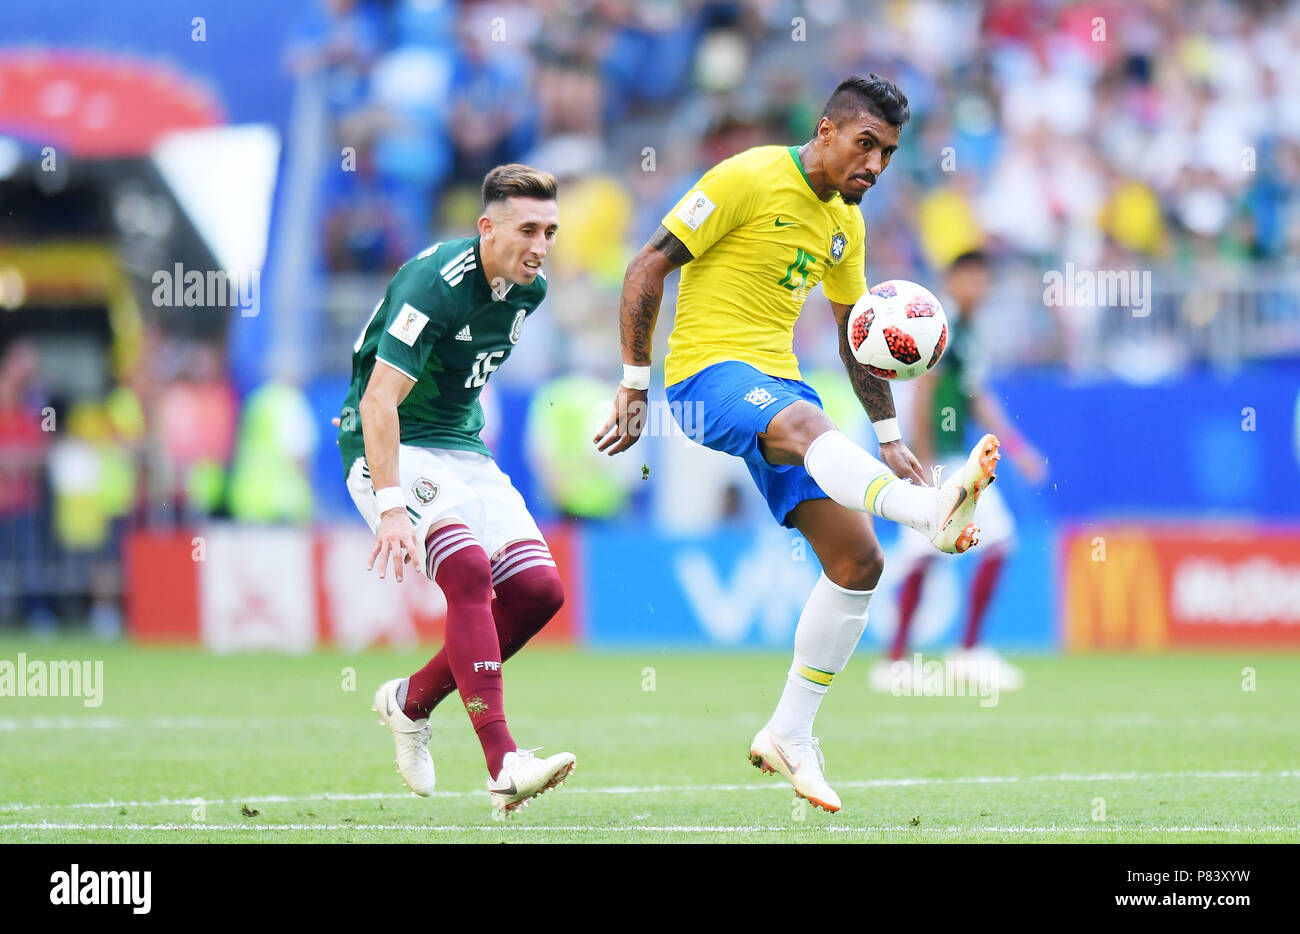 SAMARA, RUSSIA - JULY 02: Hector Herrera of Mexico competes with Paulinho of Brazil during the 2018 FIFA World Cup Russia Round of 16 match between Brazil and Mexico at Samara Arena on July 2, 2018 in Samara, Russia. (Photo by Lukasz Laskowski/PressFocus/MB Media) Stock Photo